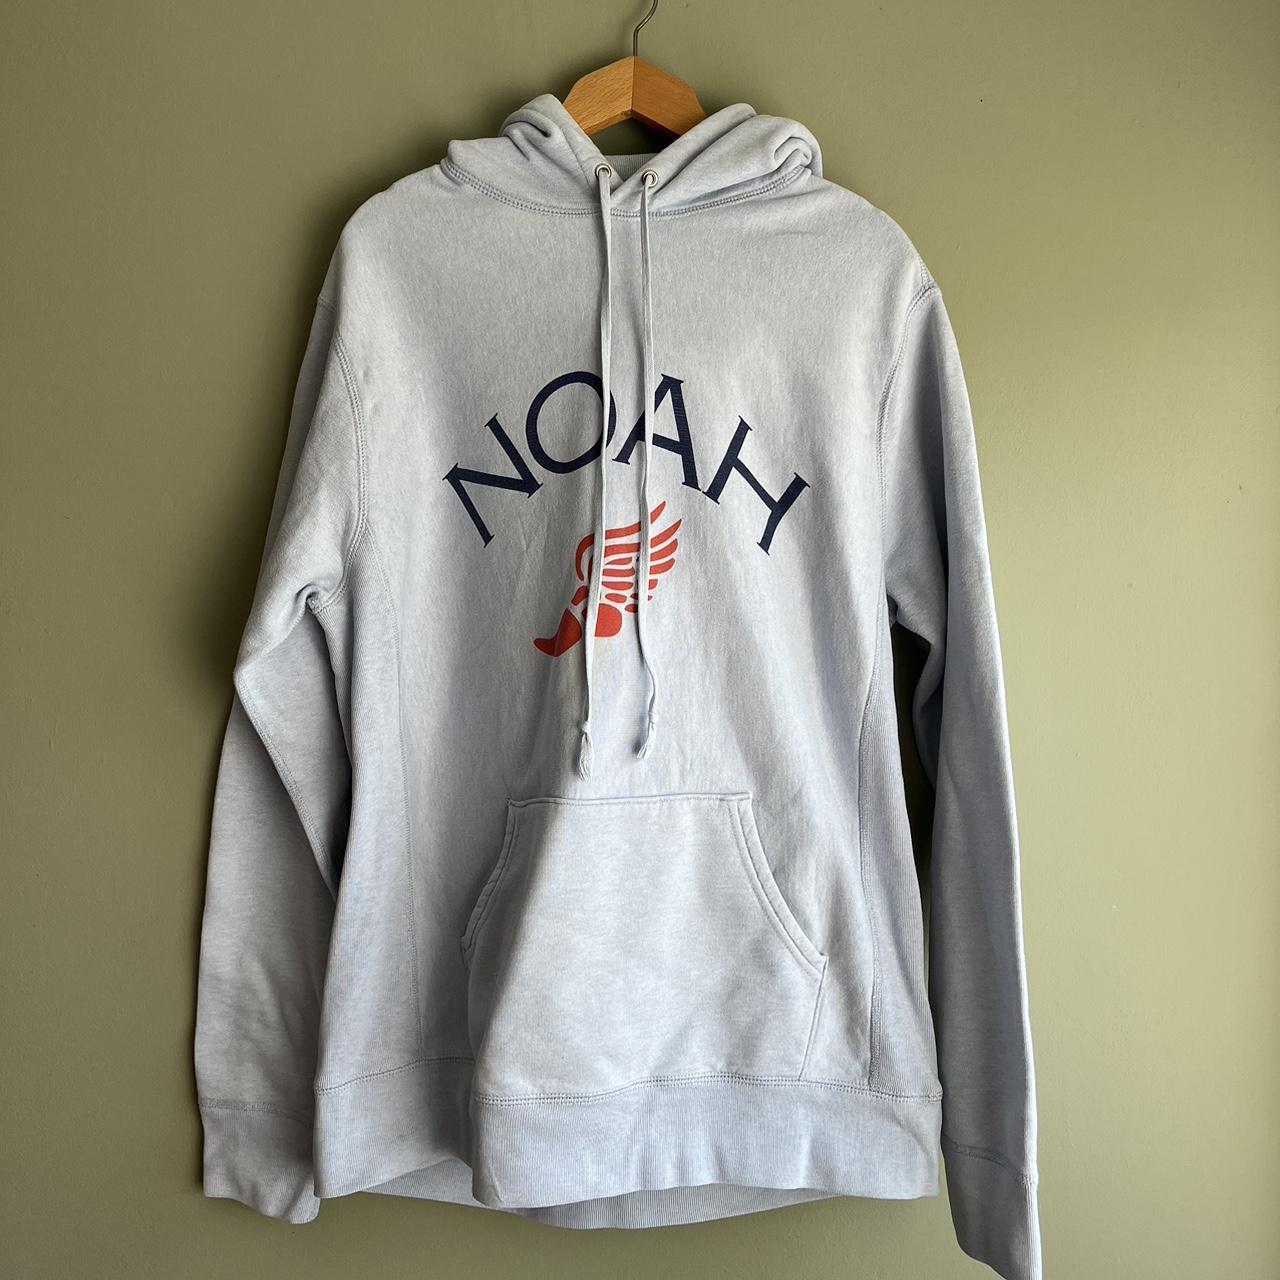 Noah light blue Winged Foot Hoodie, Bought from DSM...